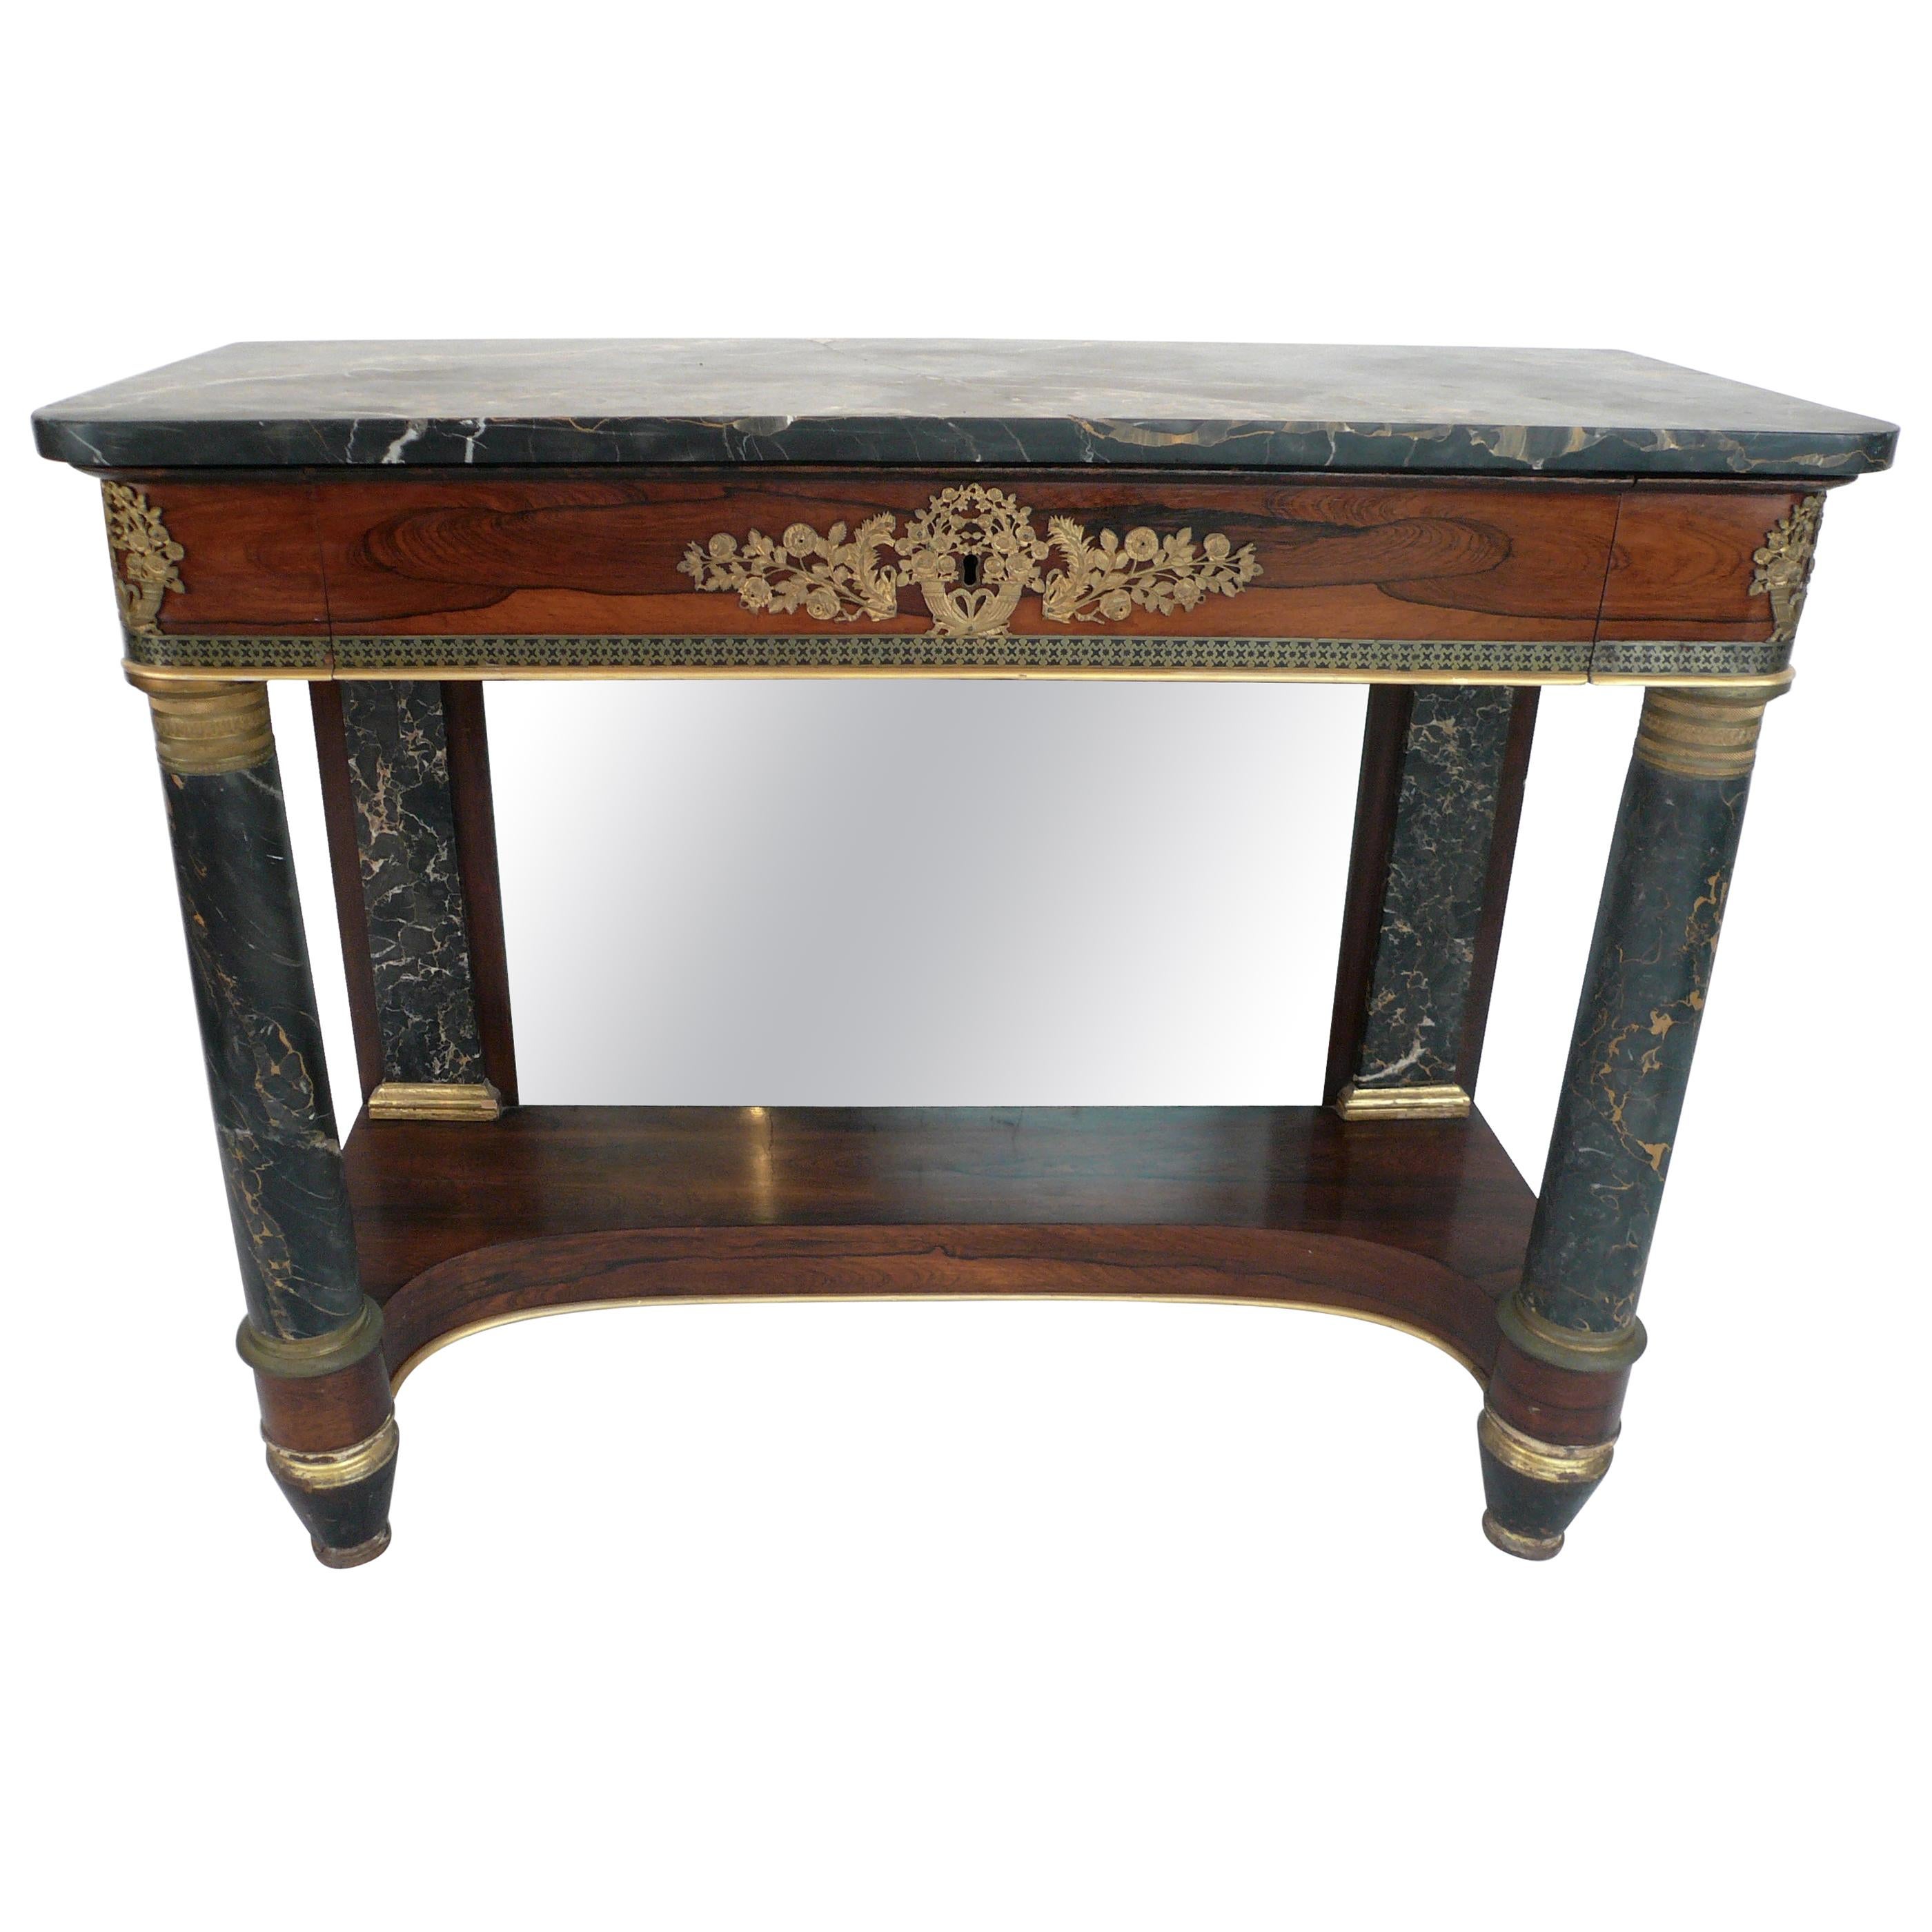 Empire Classical Marble Top Pier Table, New York